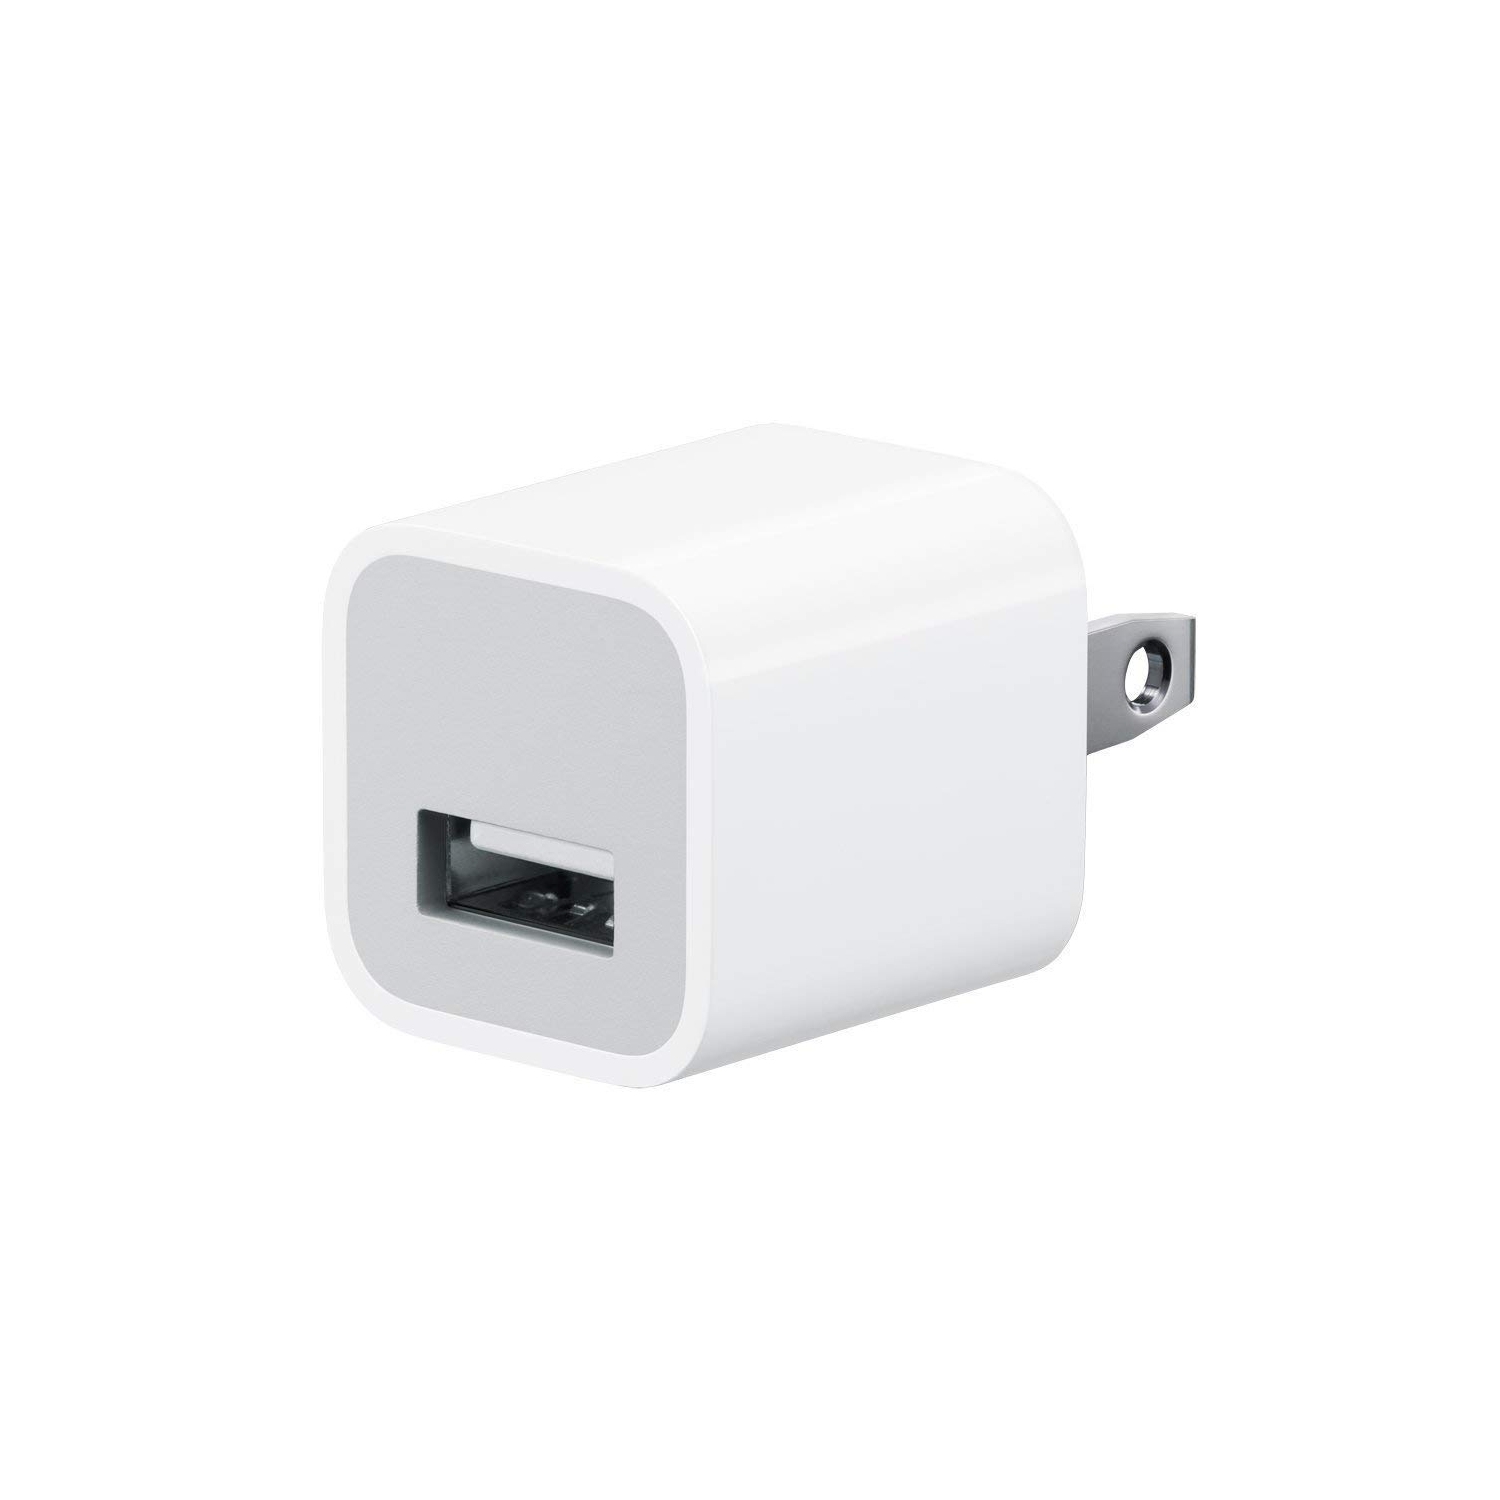 (CABLESHARK)iPhone Charger 5W Cube USB Adapter + 6 Foot (2 Meter) 8-Pin USB Cable for iPod, iPad, iPhone